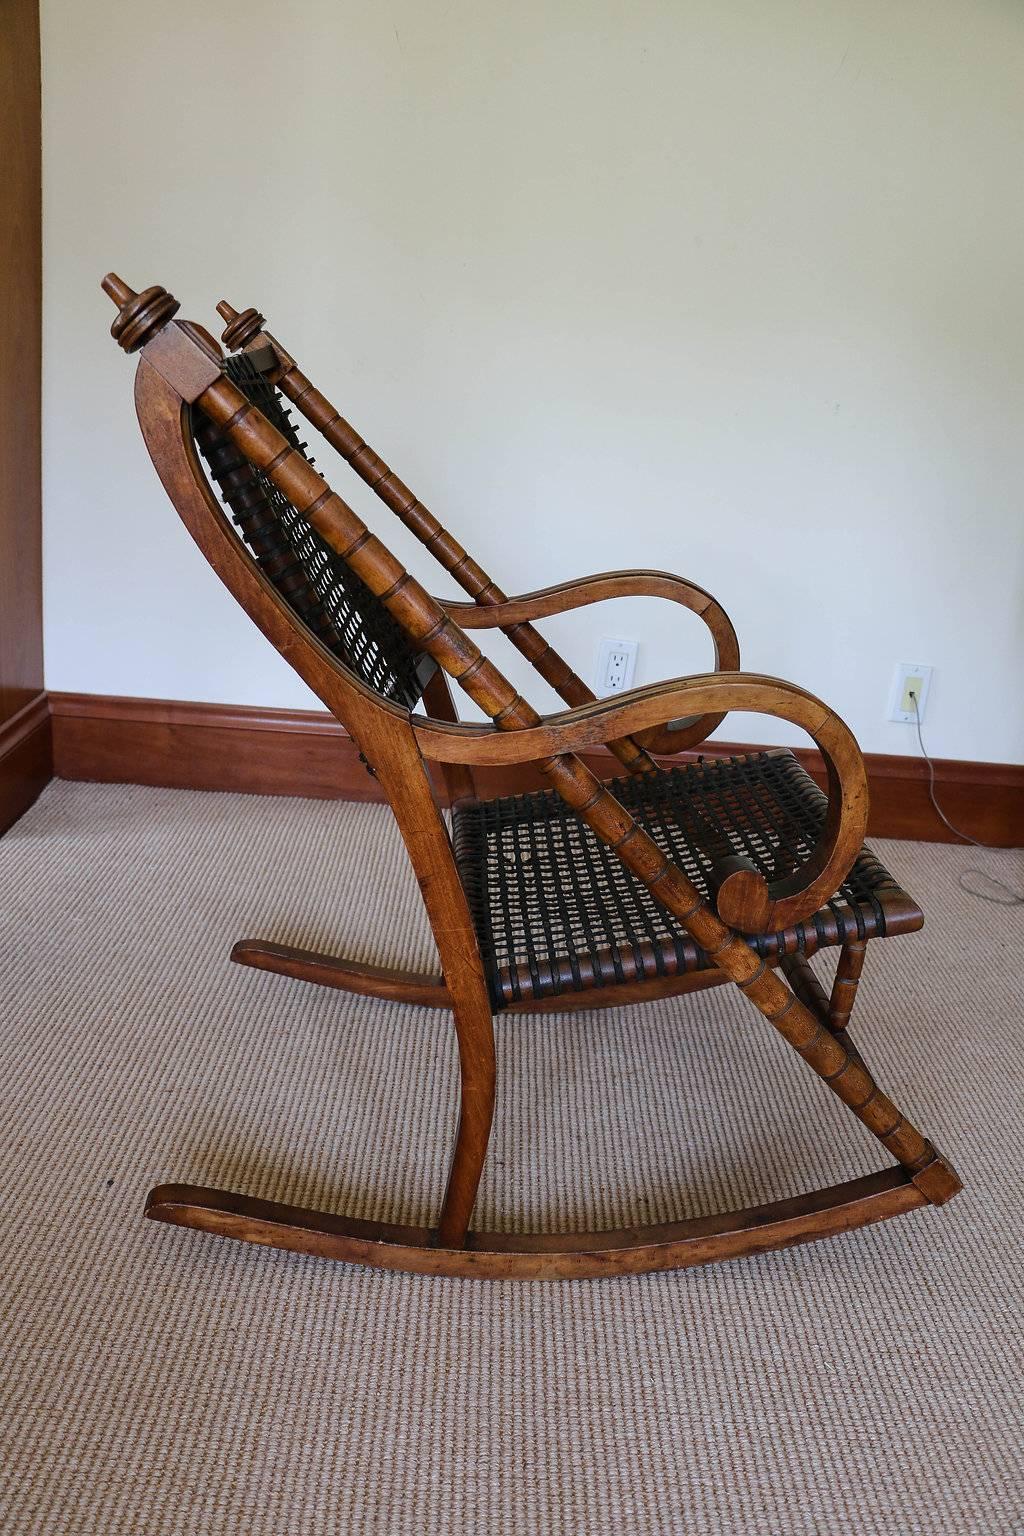 American Rare George Hunzinger Rocking Chair with Patented Steel Webbing, 1869 For Sale